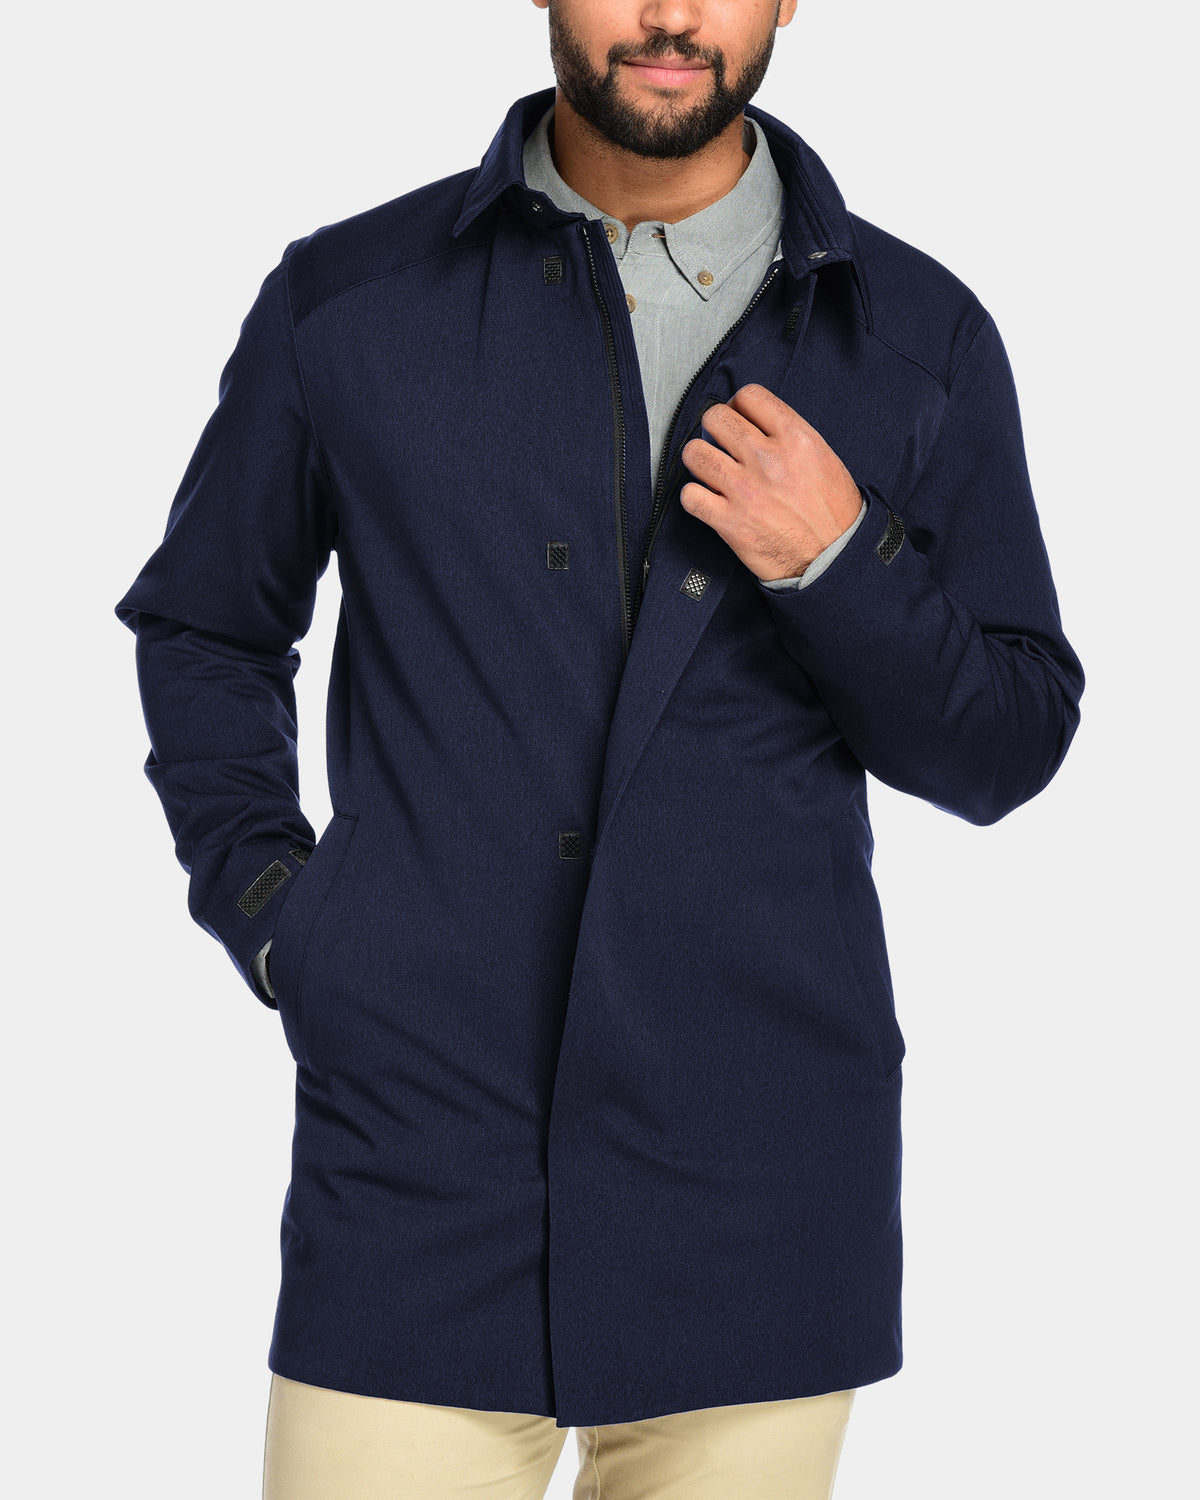 Men's Waterproof Trench Coat the Chelsea Trench by Fisher + Baker